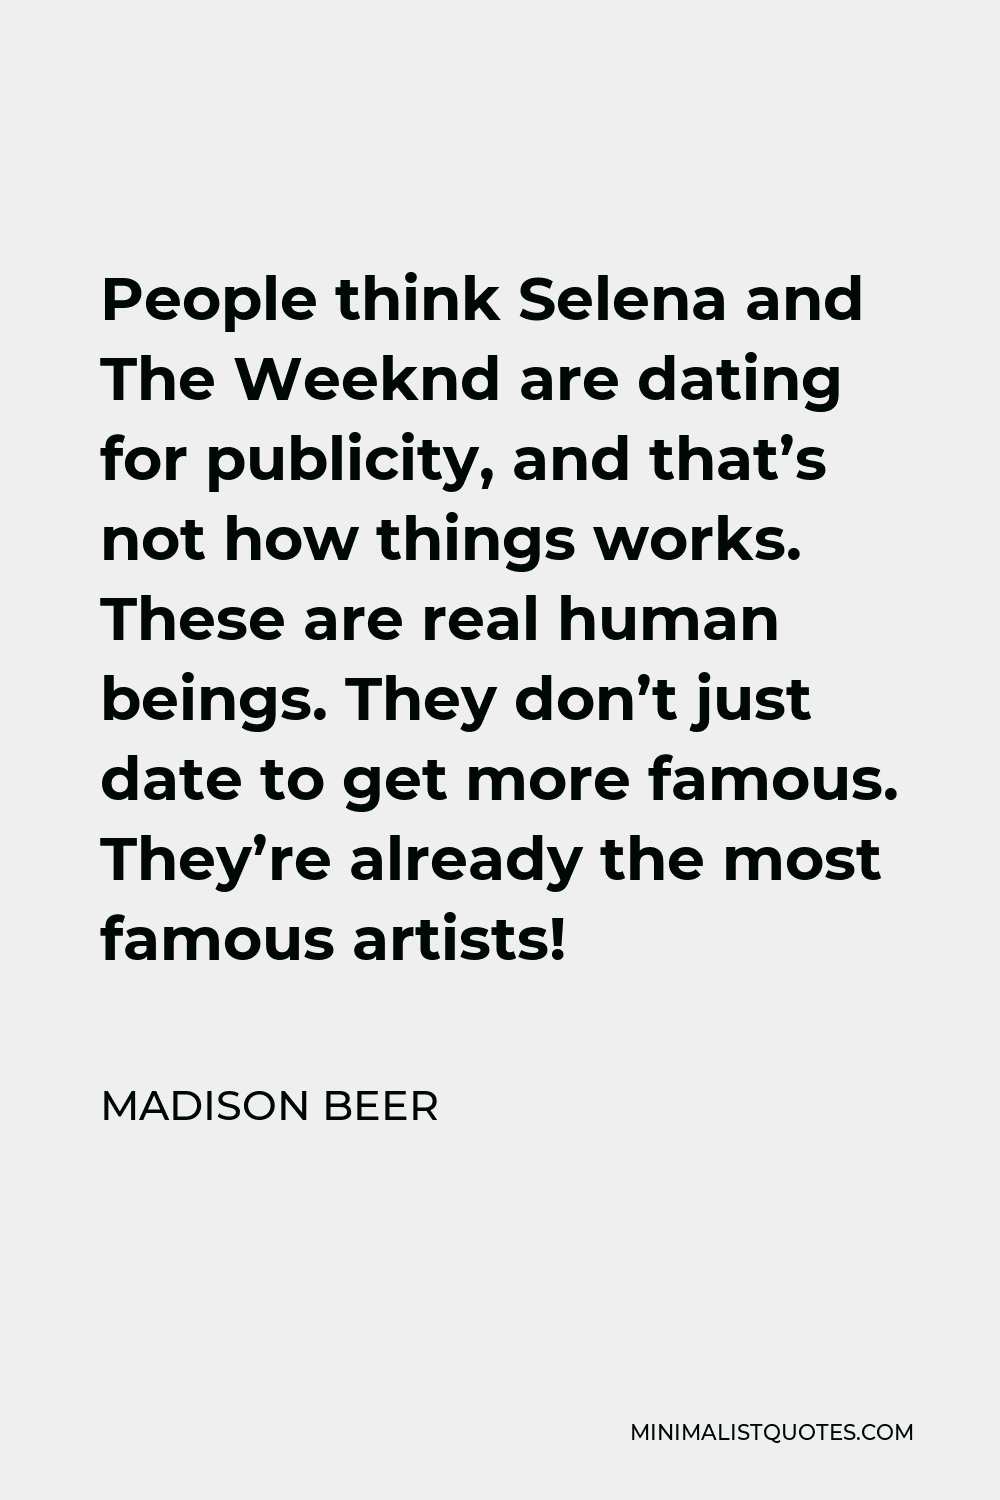 Madison Beer Quote - People think Selena and The Weeknd are dating for publicity, and that’s not how things works. These are real human beings. They don’t just date to get more famous. They’re already the most famous artists!